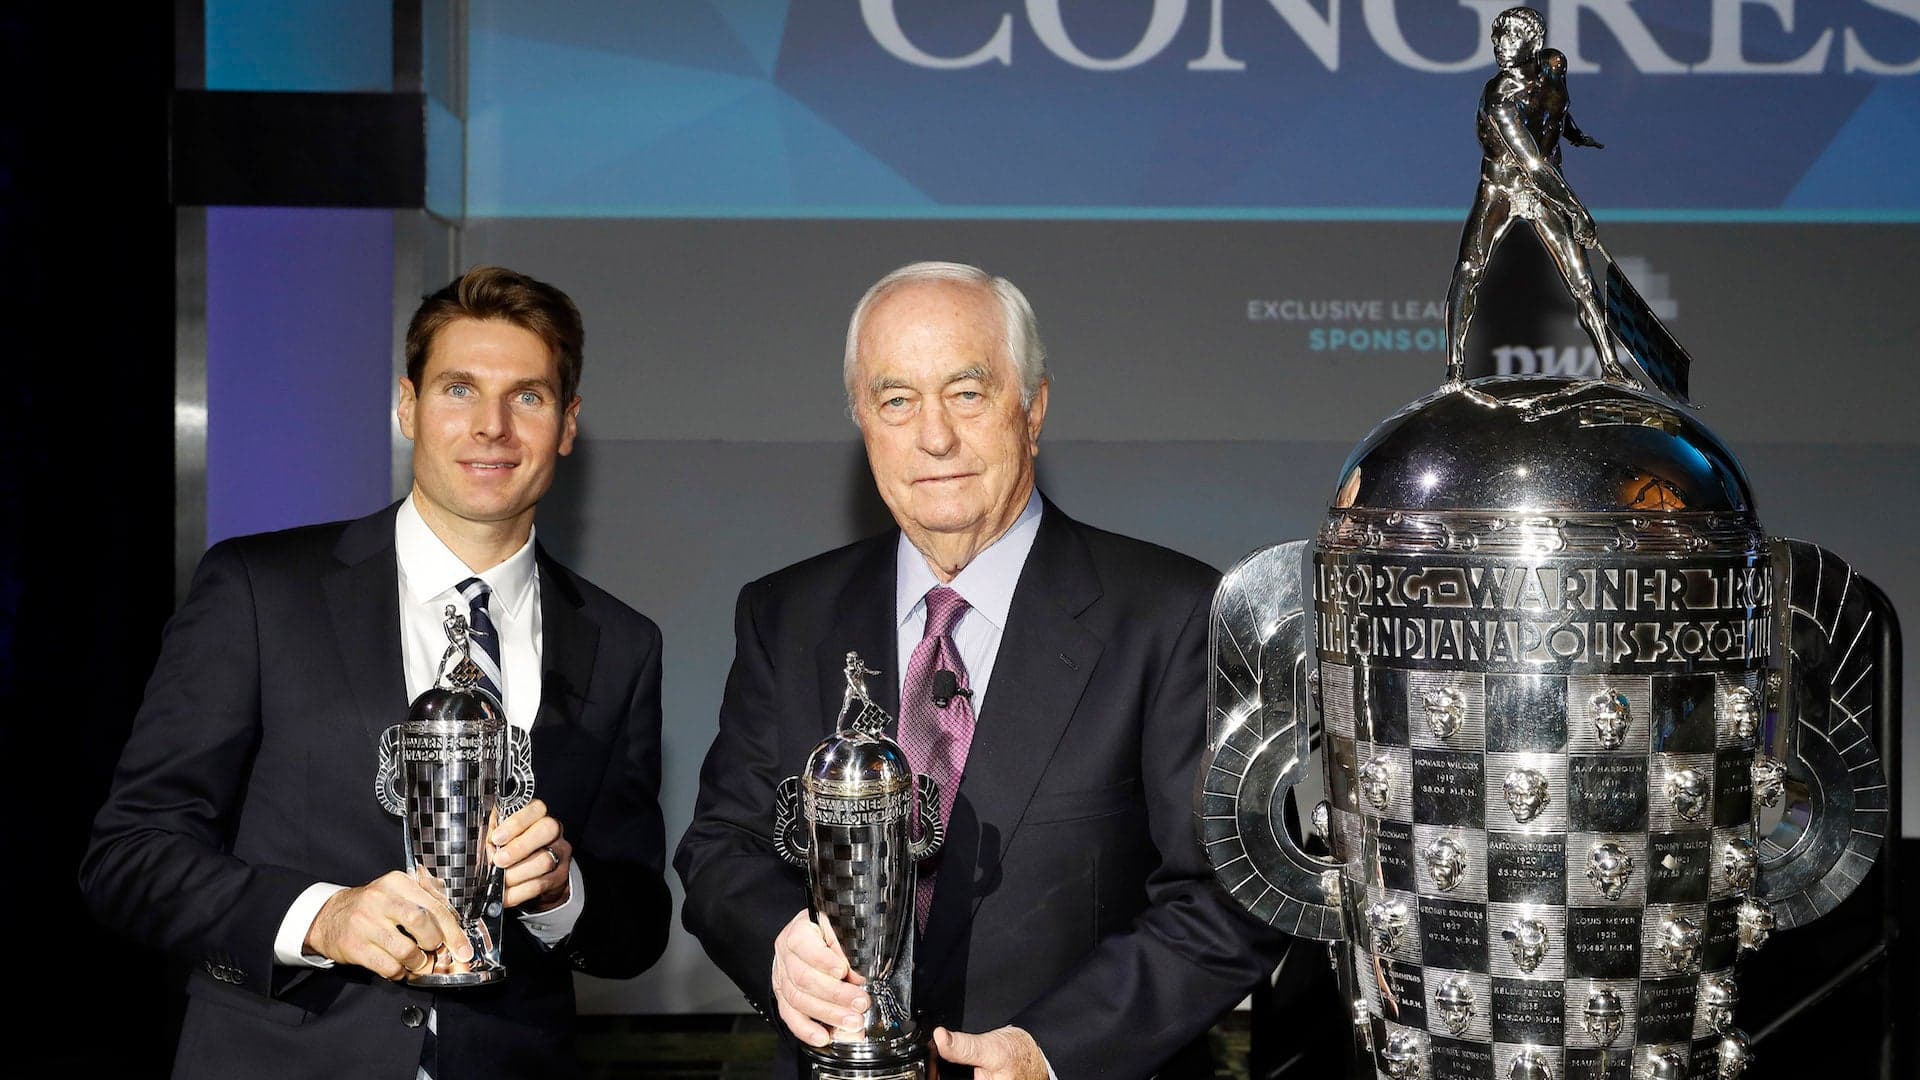 Indy 500 Champ Will Power and Roger Penske Receive ‘Baby Borg’ Trophies in Detroit